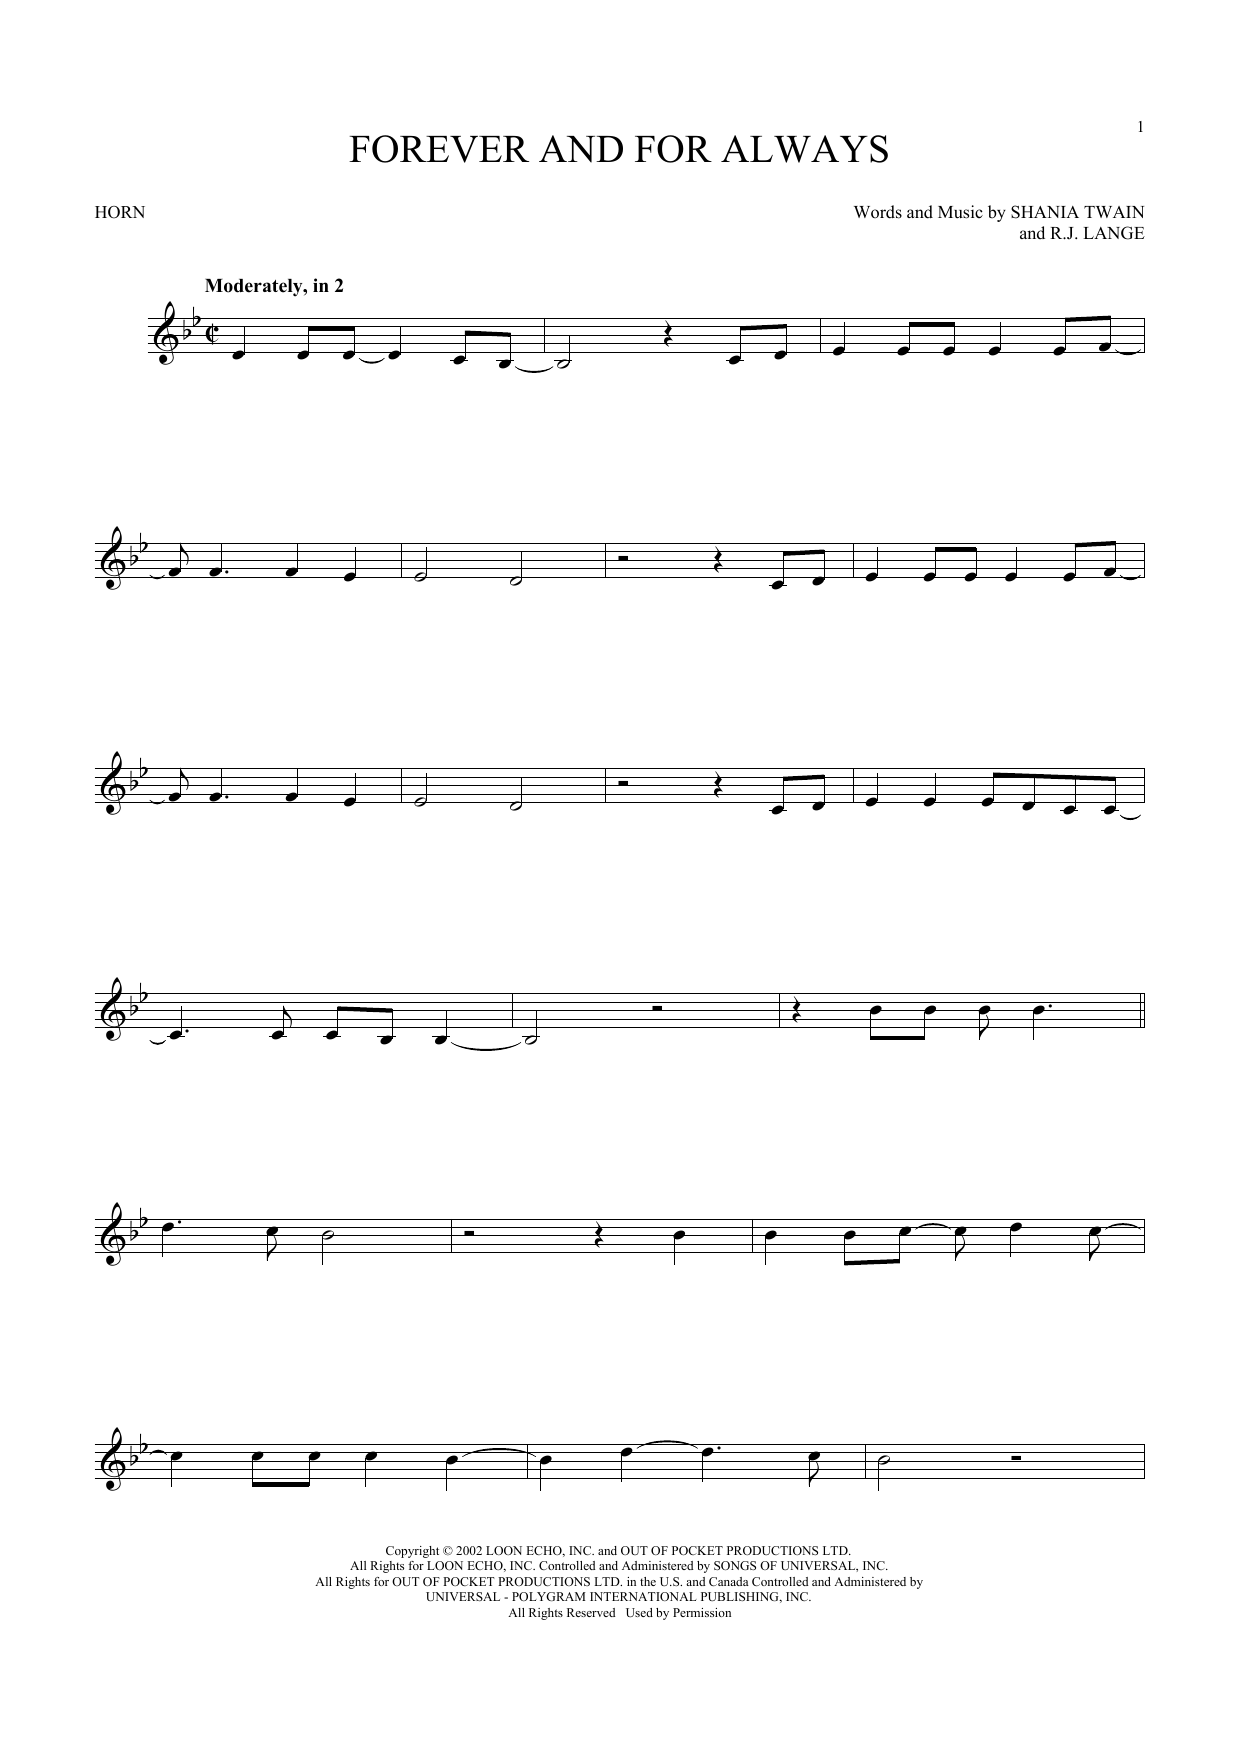 Download Shania Twain Forever And For Always Sheet Music